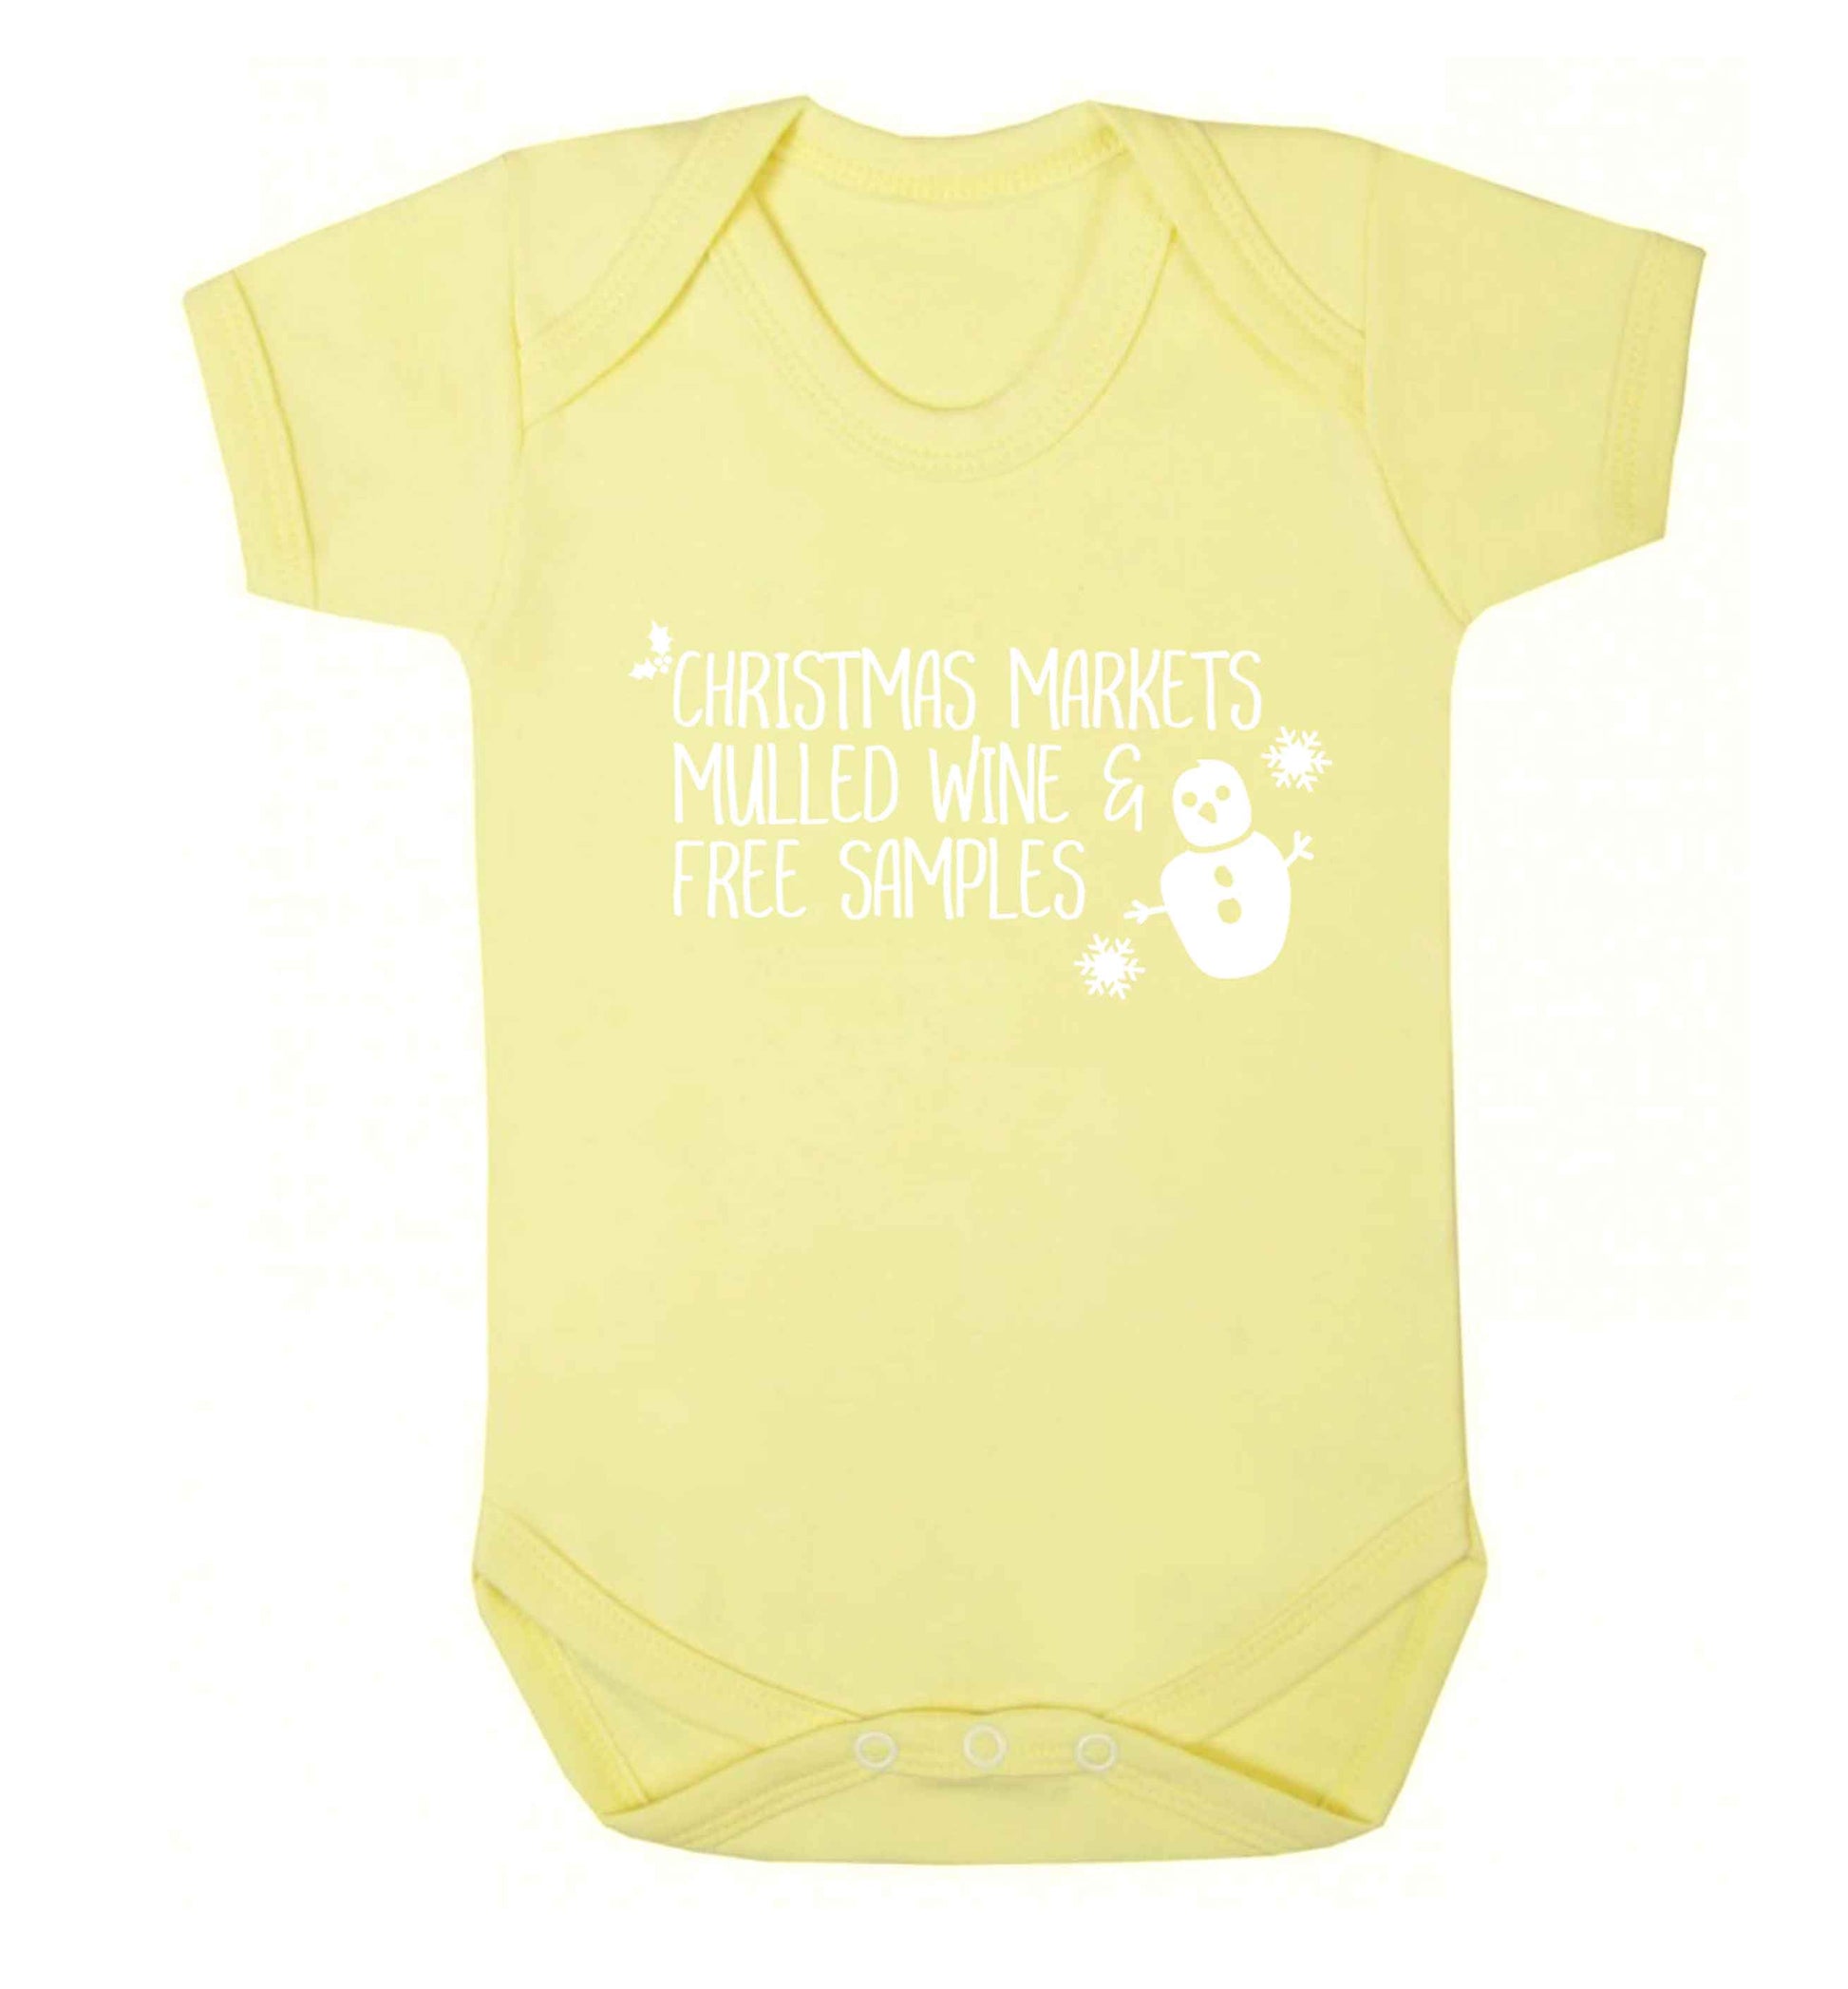 Christmas market mulled wine & free samples Baby Vest pale yellow 18-24 months